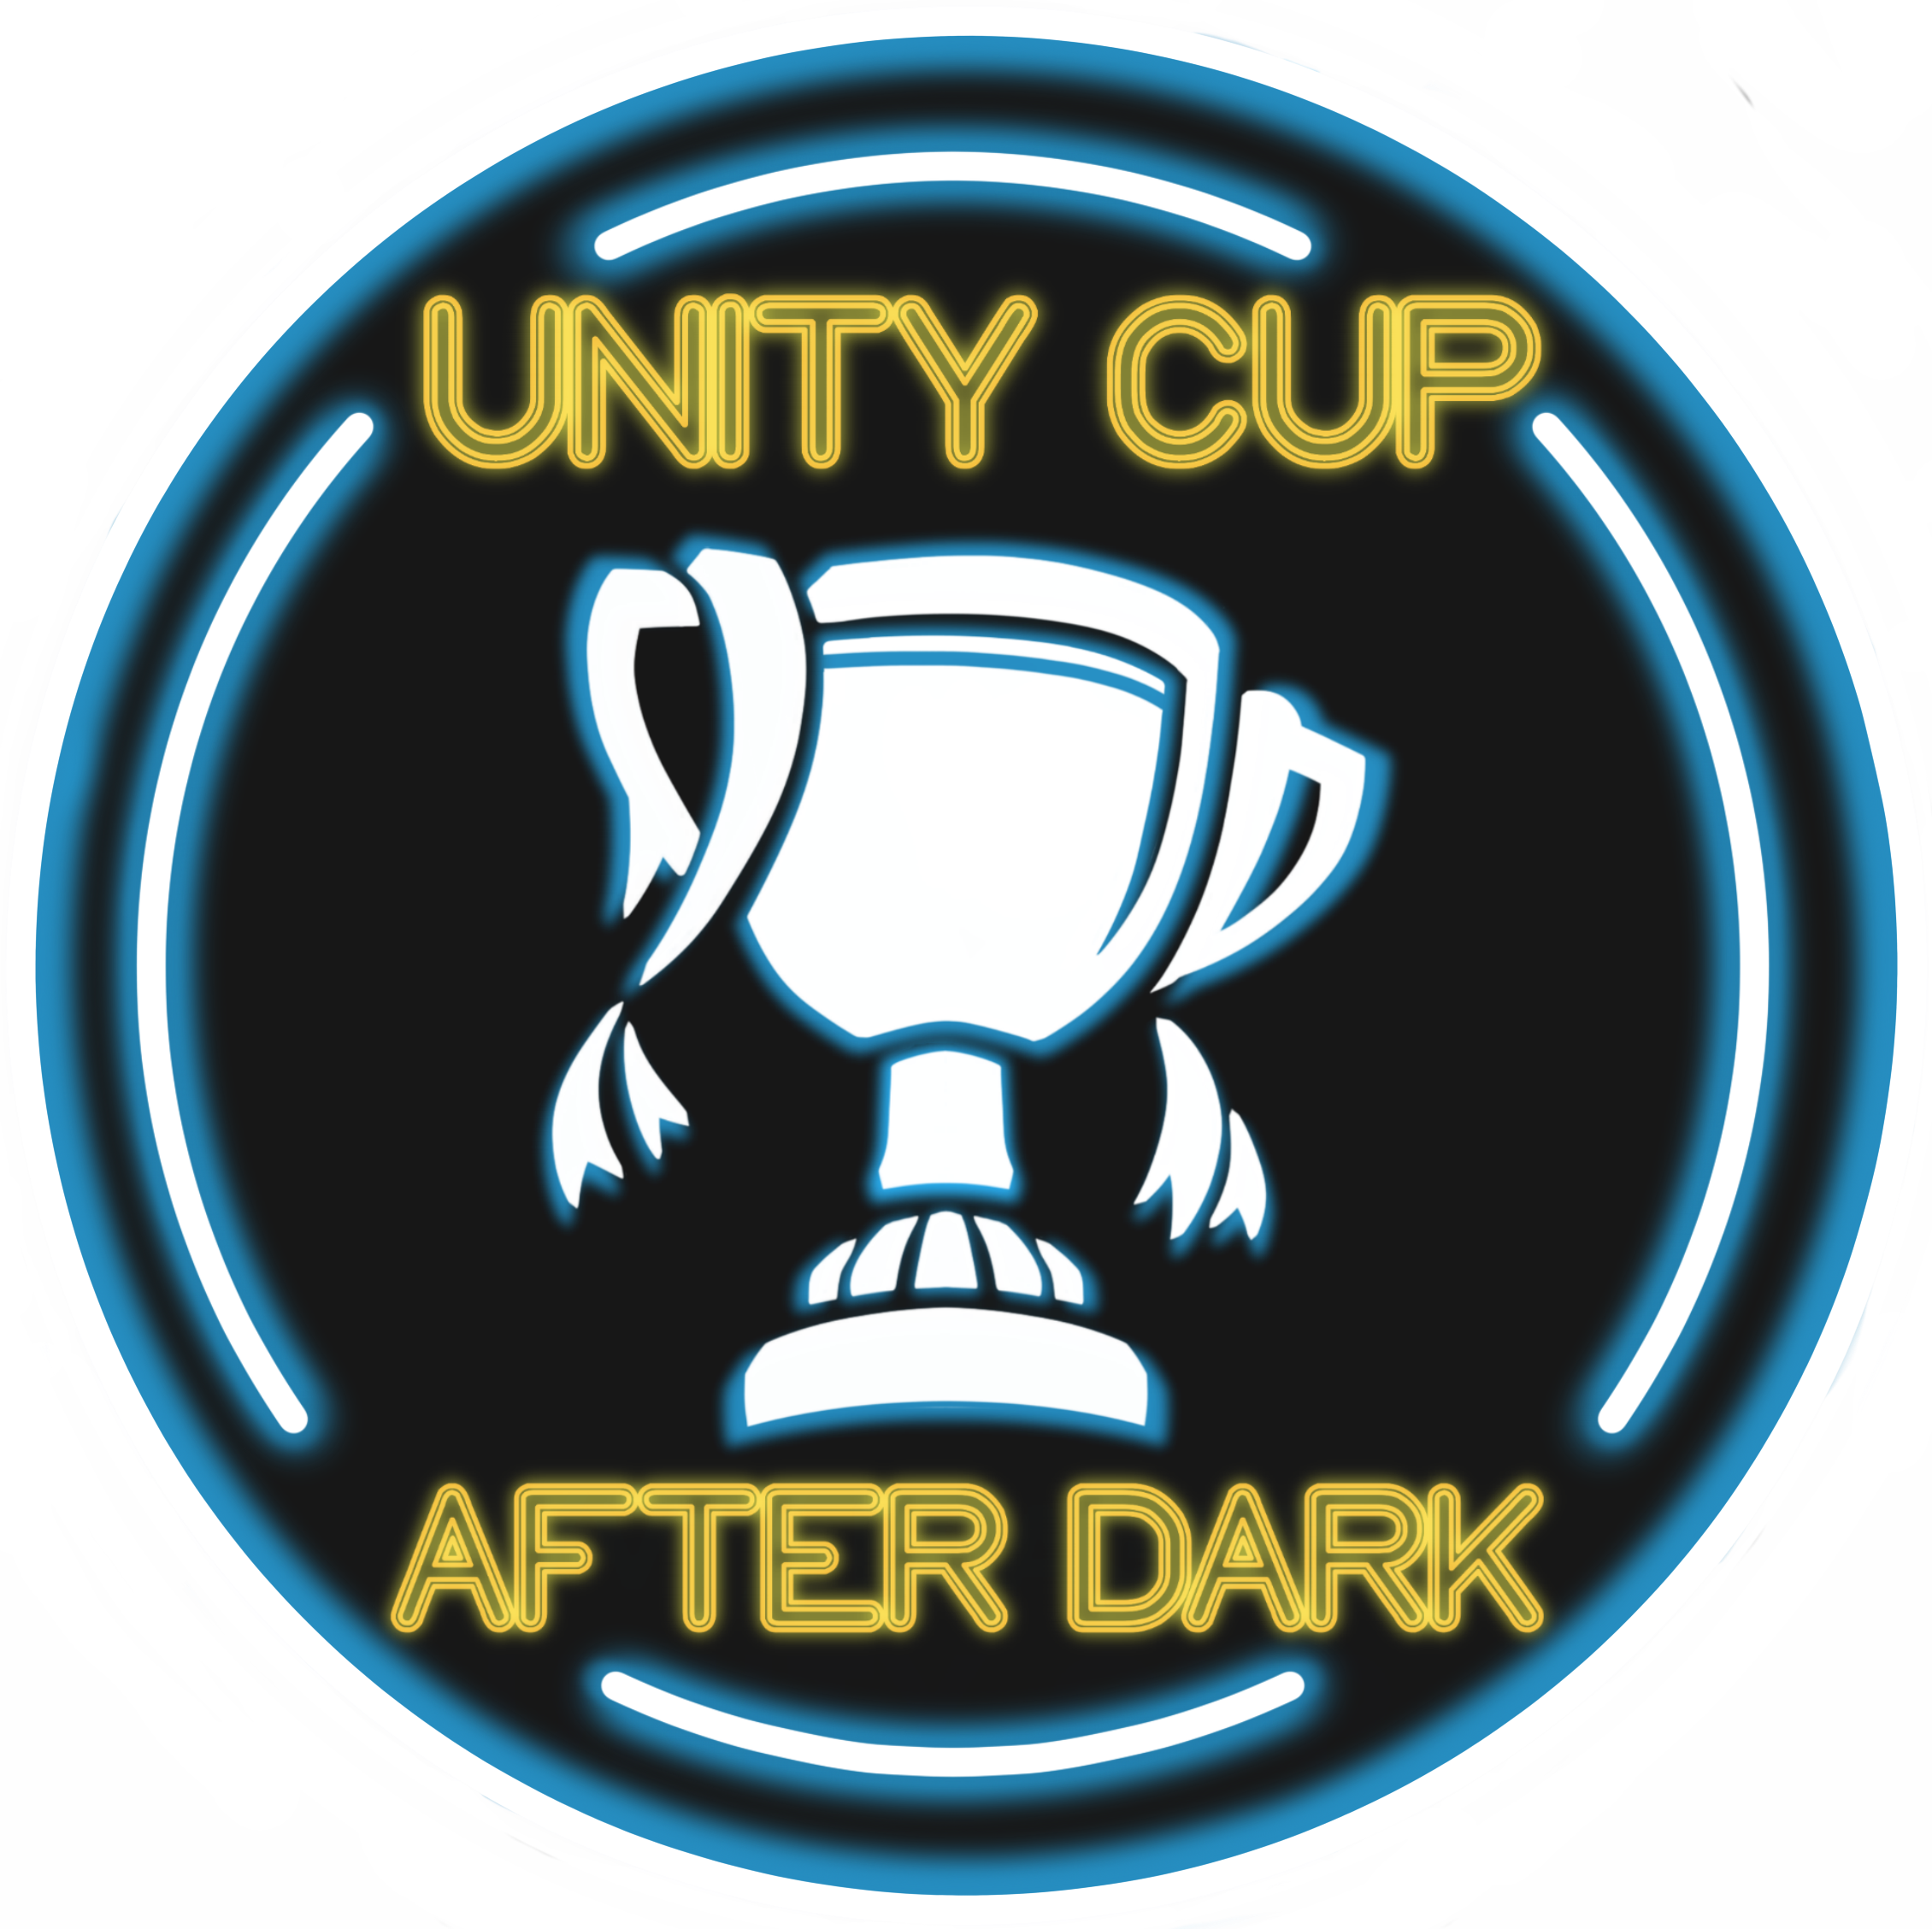 /vt/ League Unity Cup After Dark